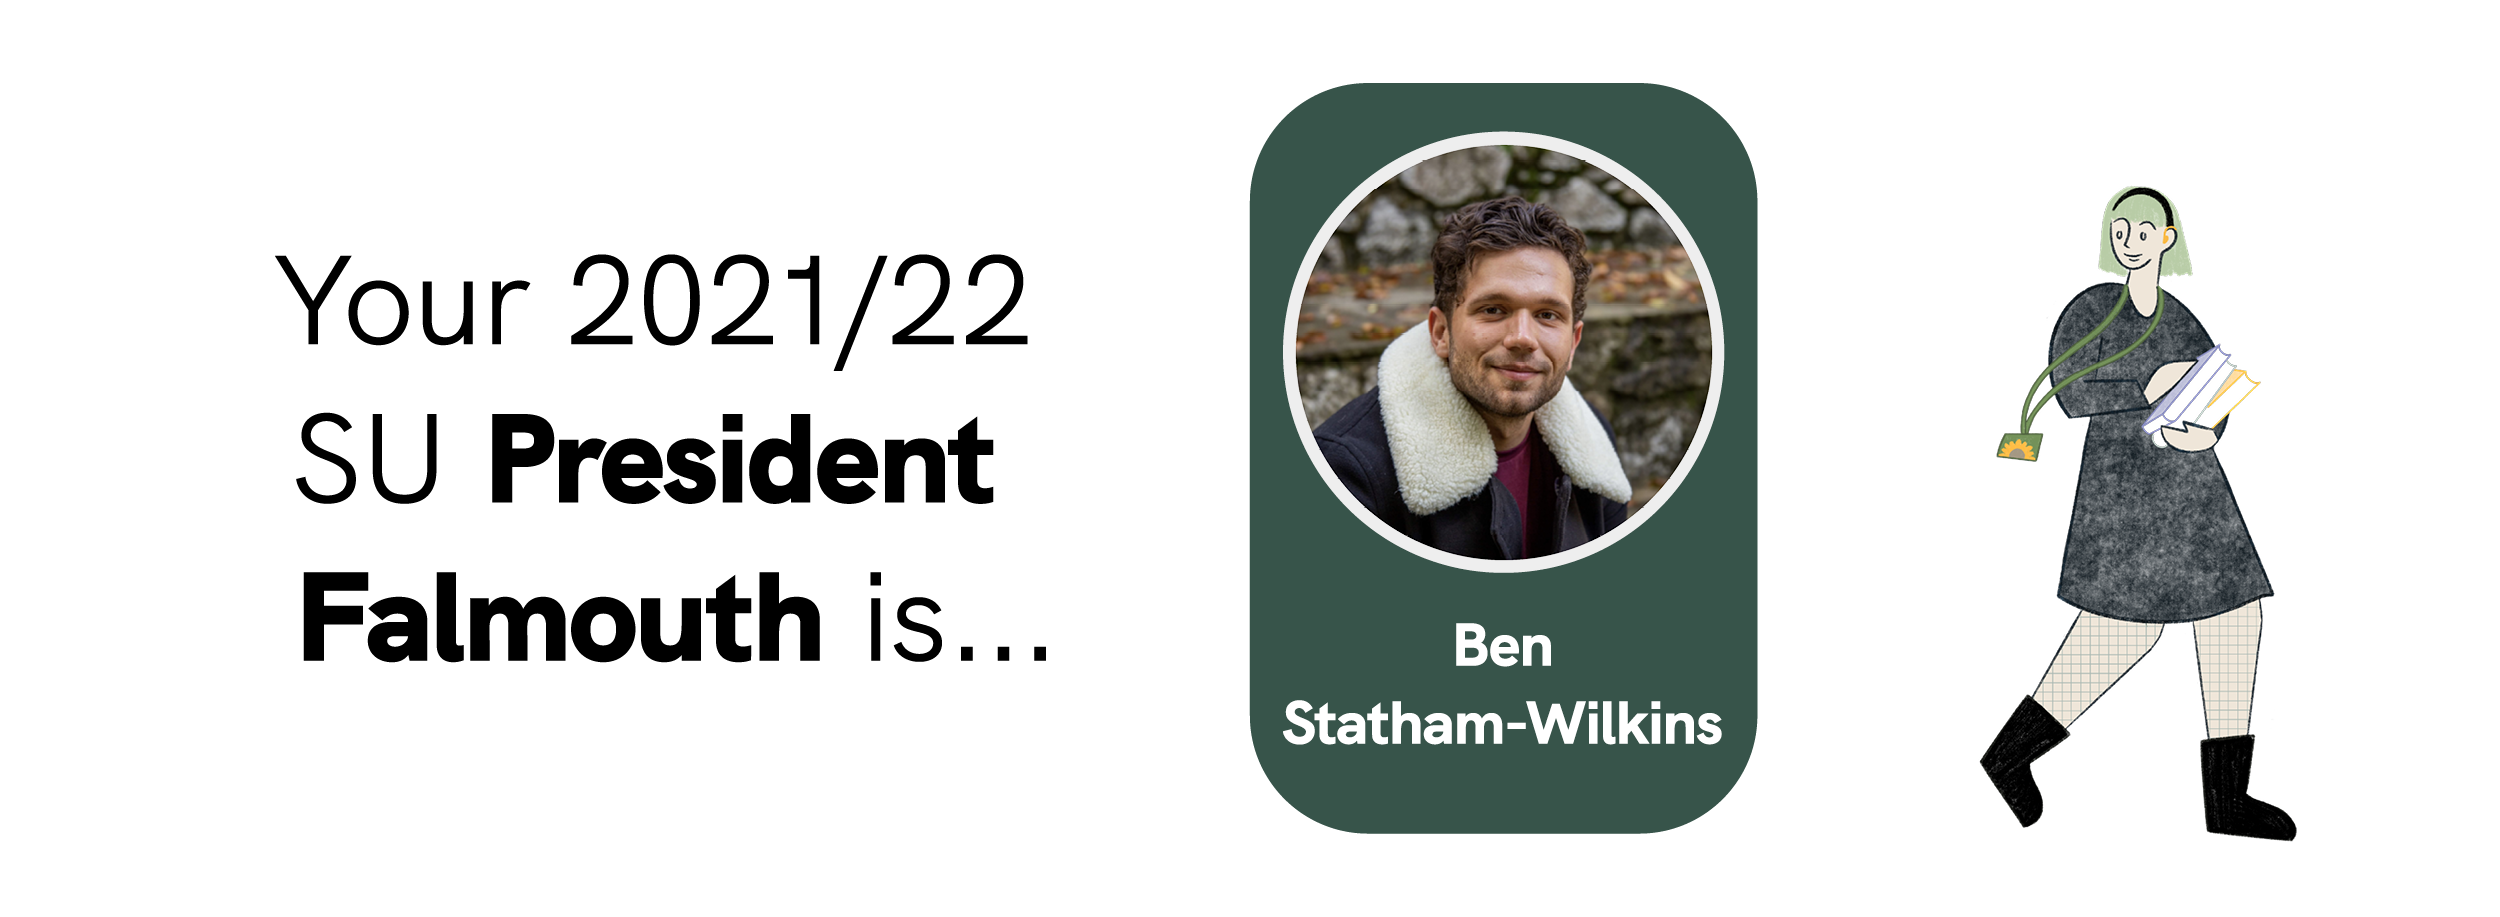 Your 2021/22 SU President Falmouth is... Ben Statham-Wilkins!